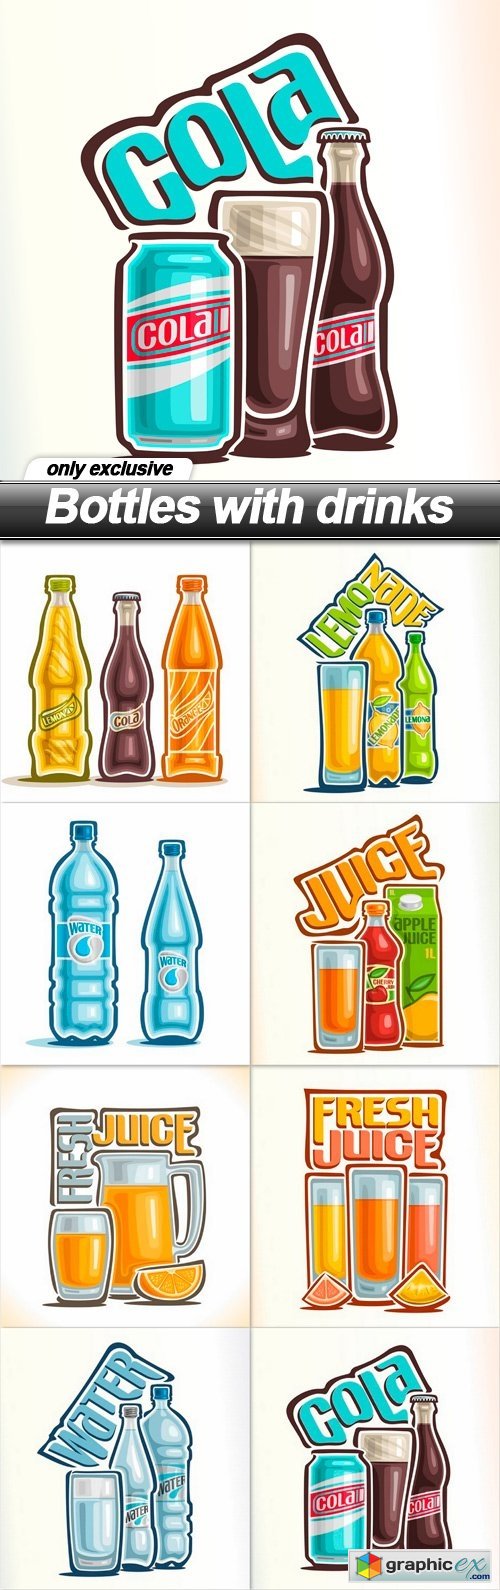 Bottles with drinks - 8 EPS